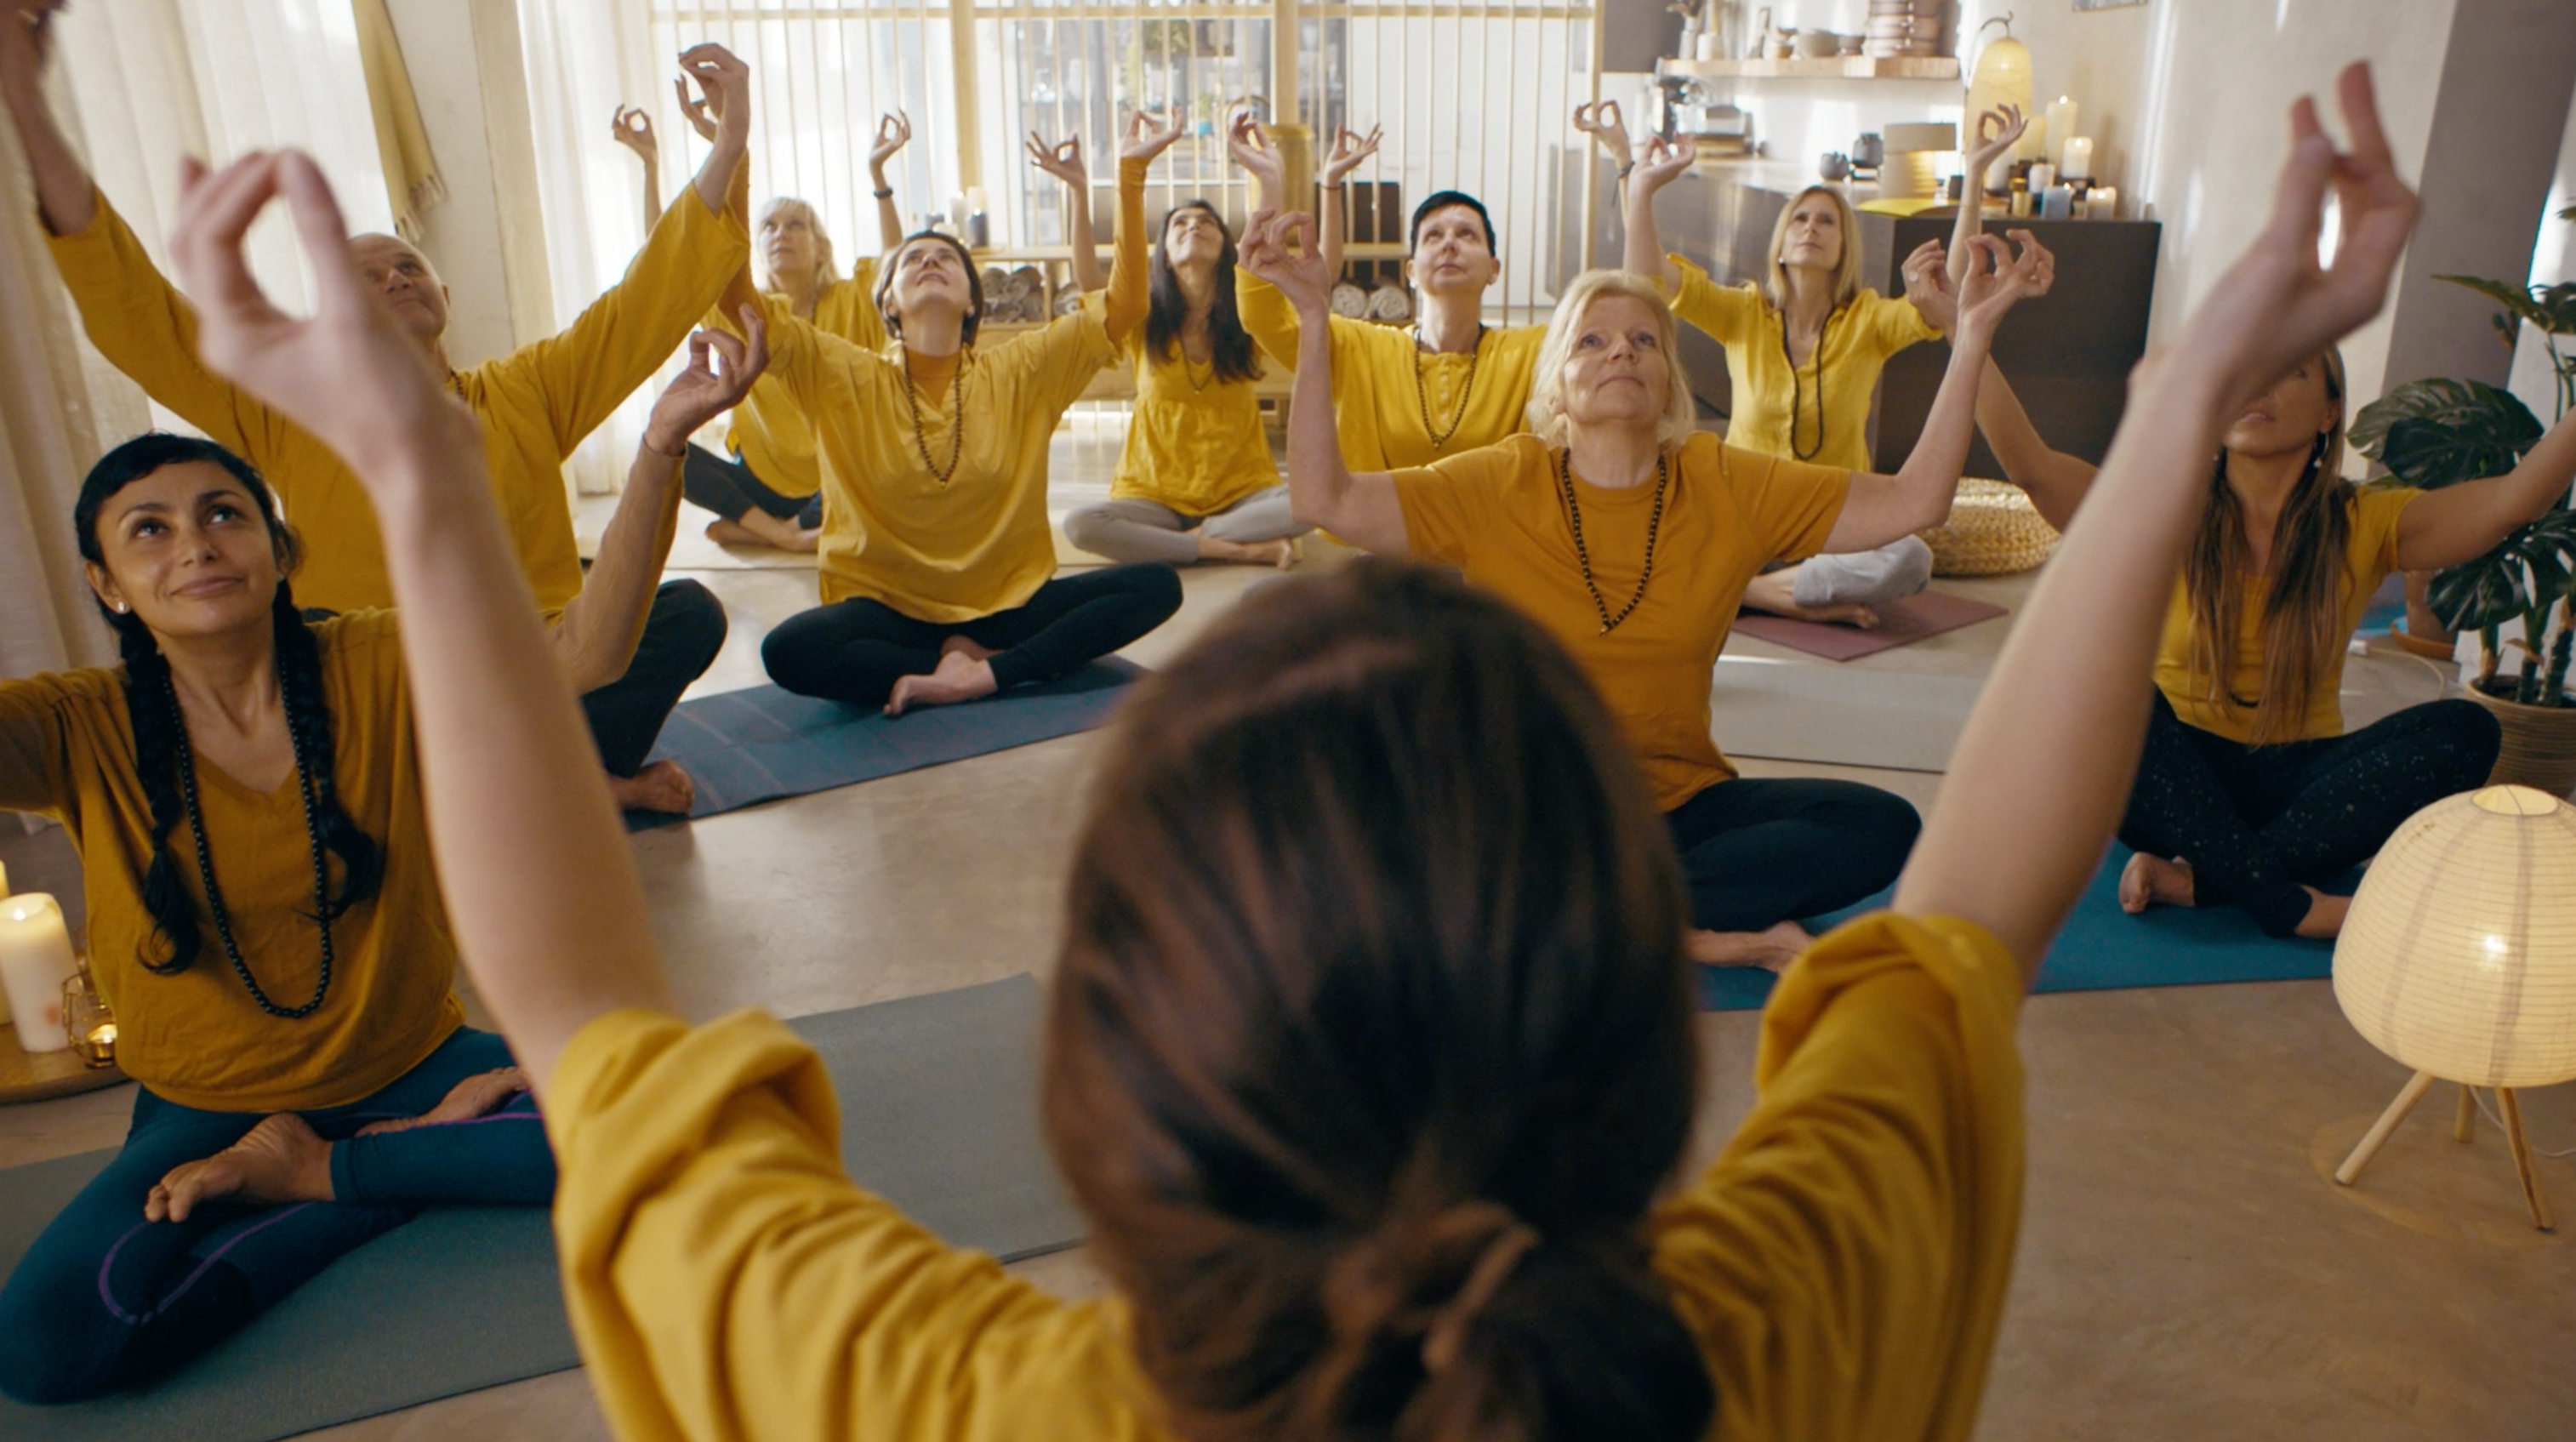 Campaign for Europabank, people doing yoga